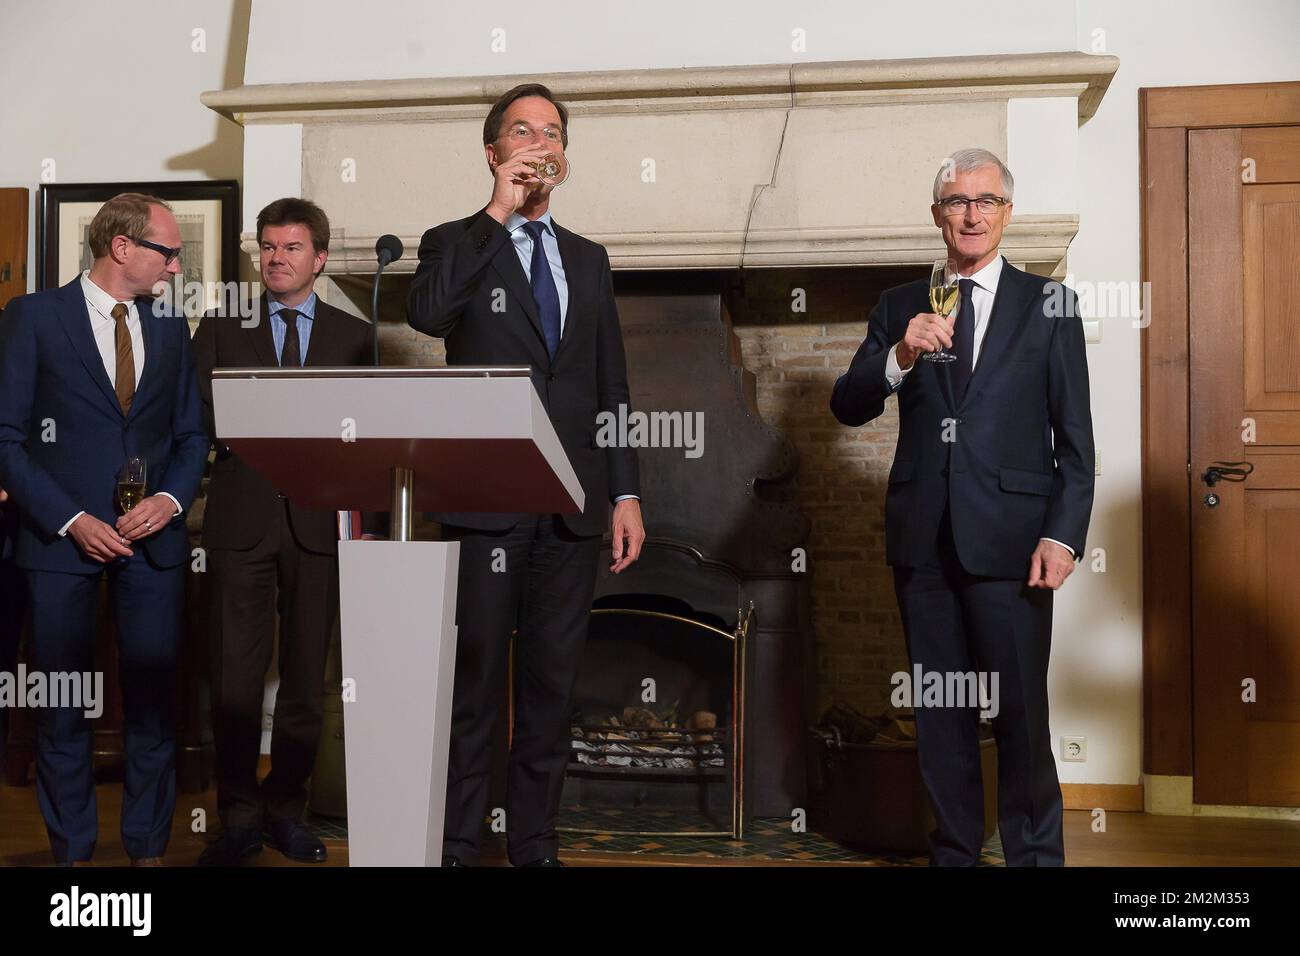 Prime Minister of the Netherlands Mark Rutte and Flemish Minister-President  Geert Bourgeois pictured during a